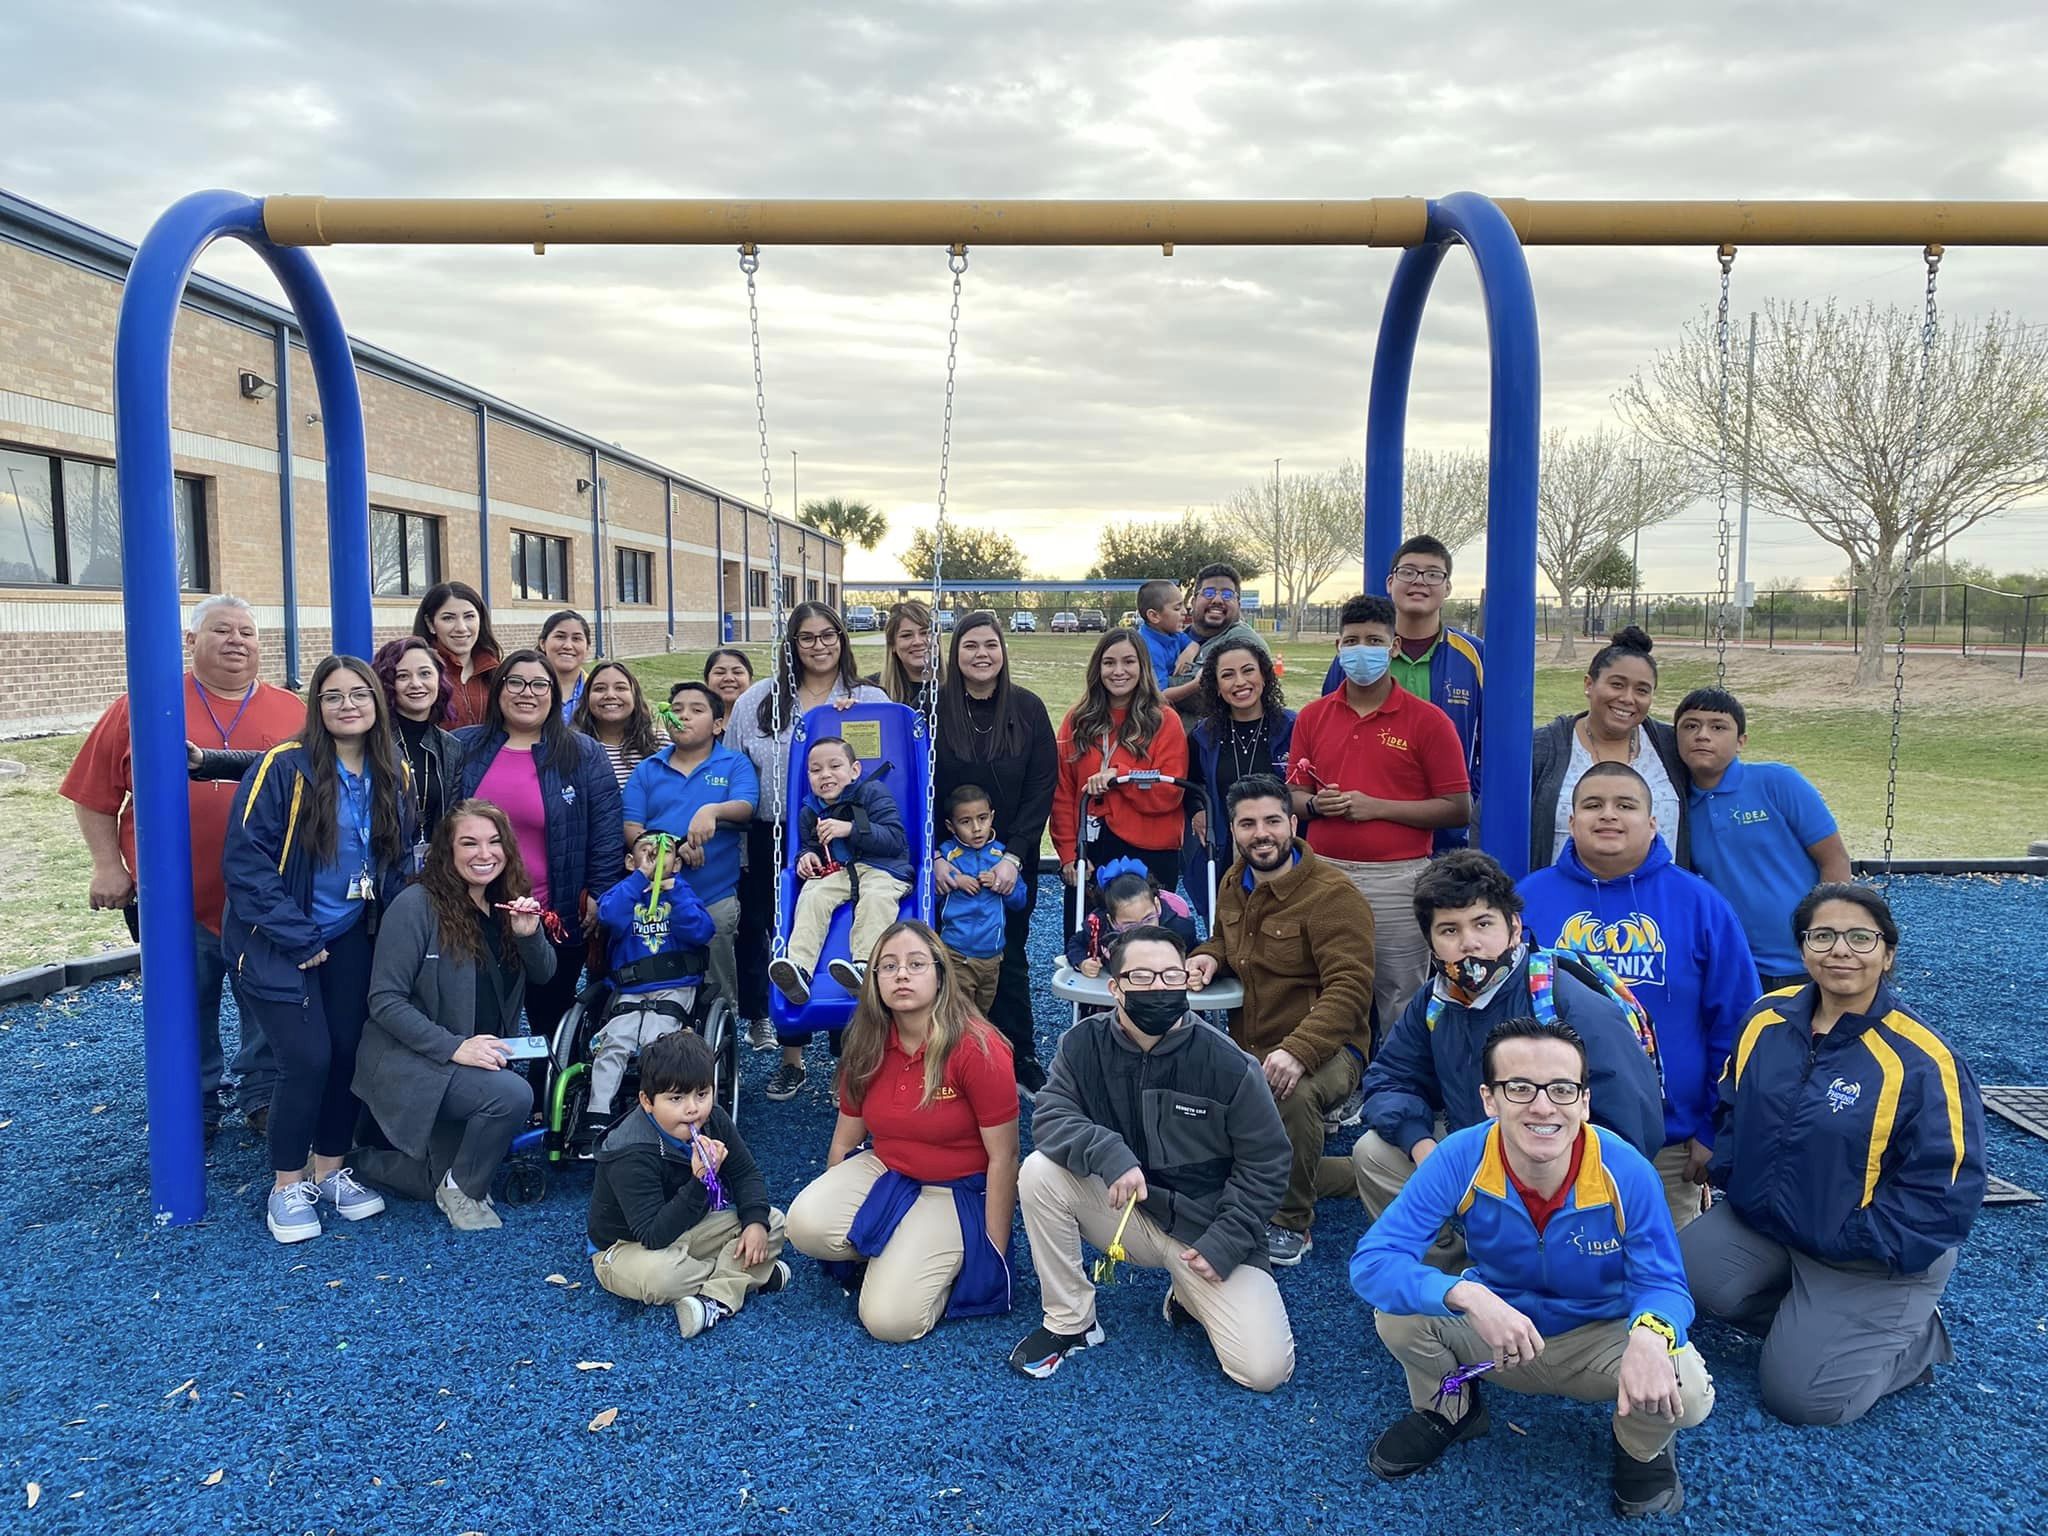 Kids and Teachers at an Inclusive Playground